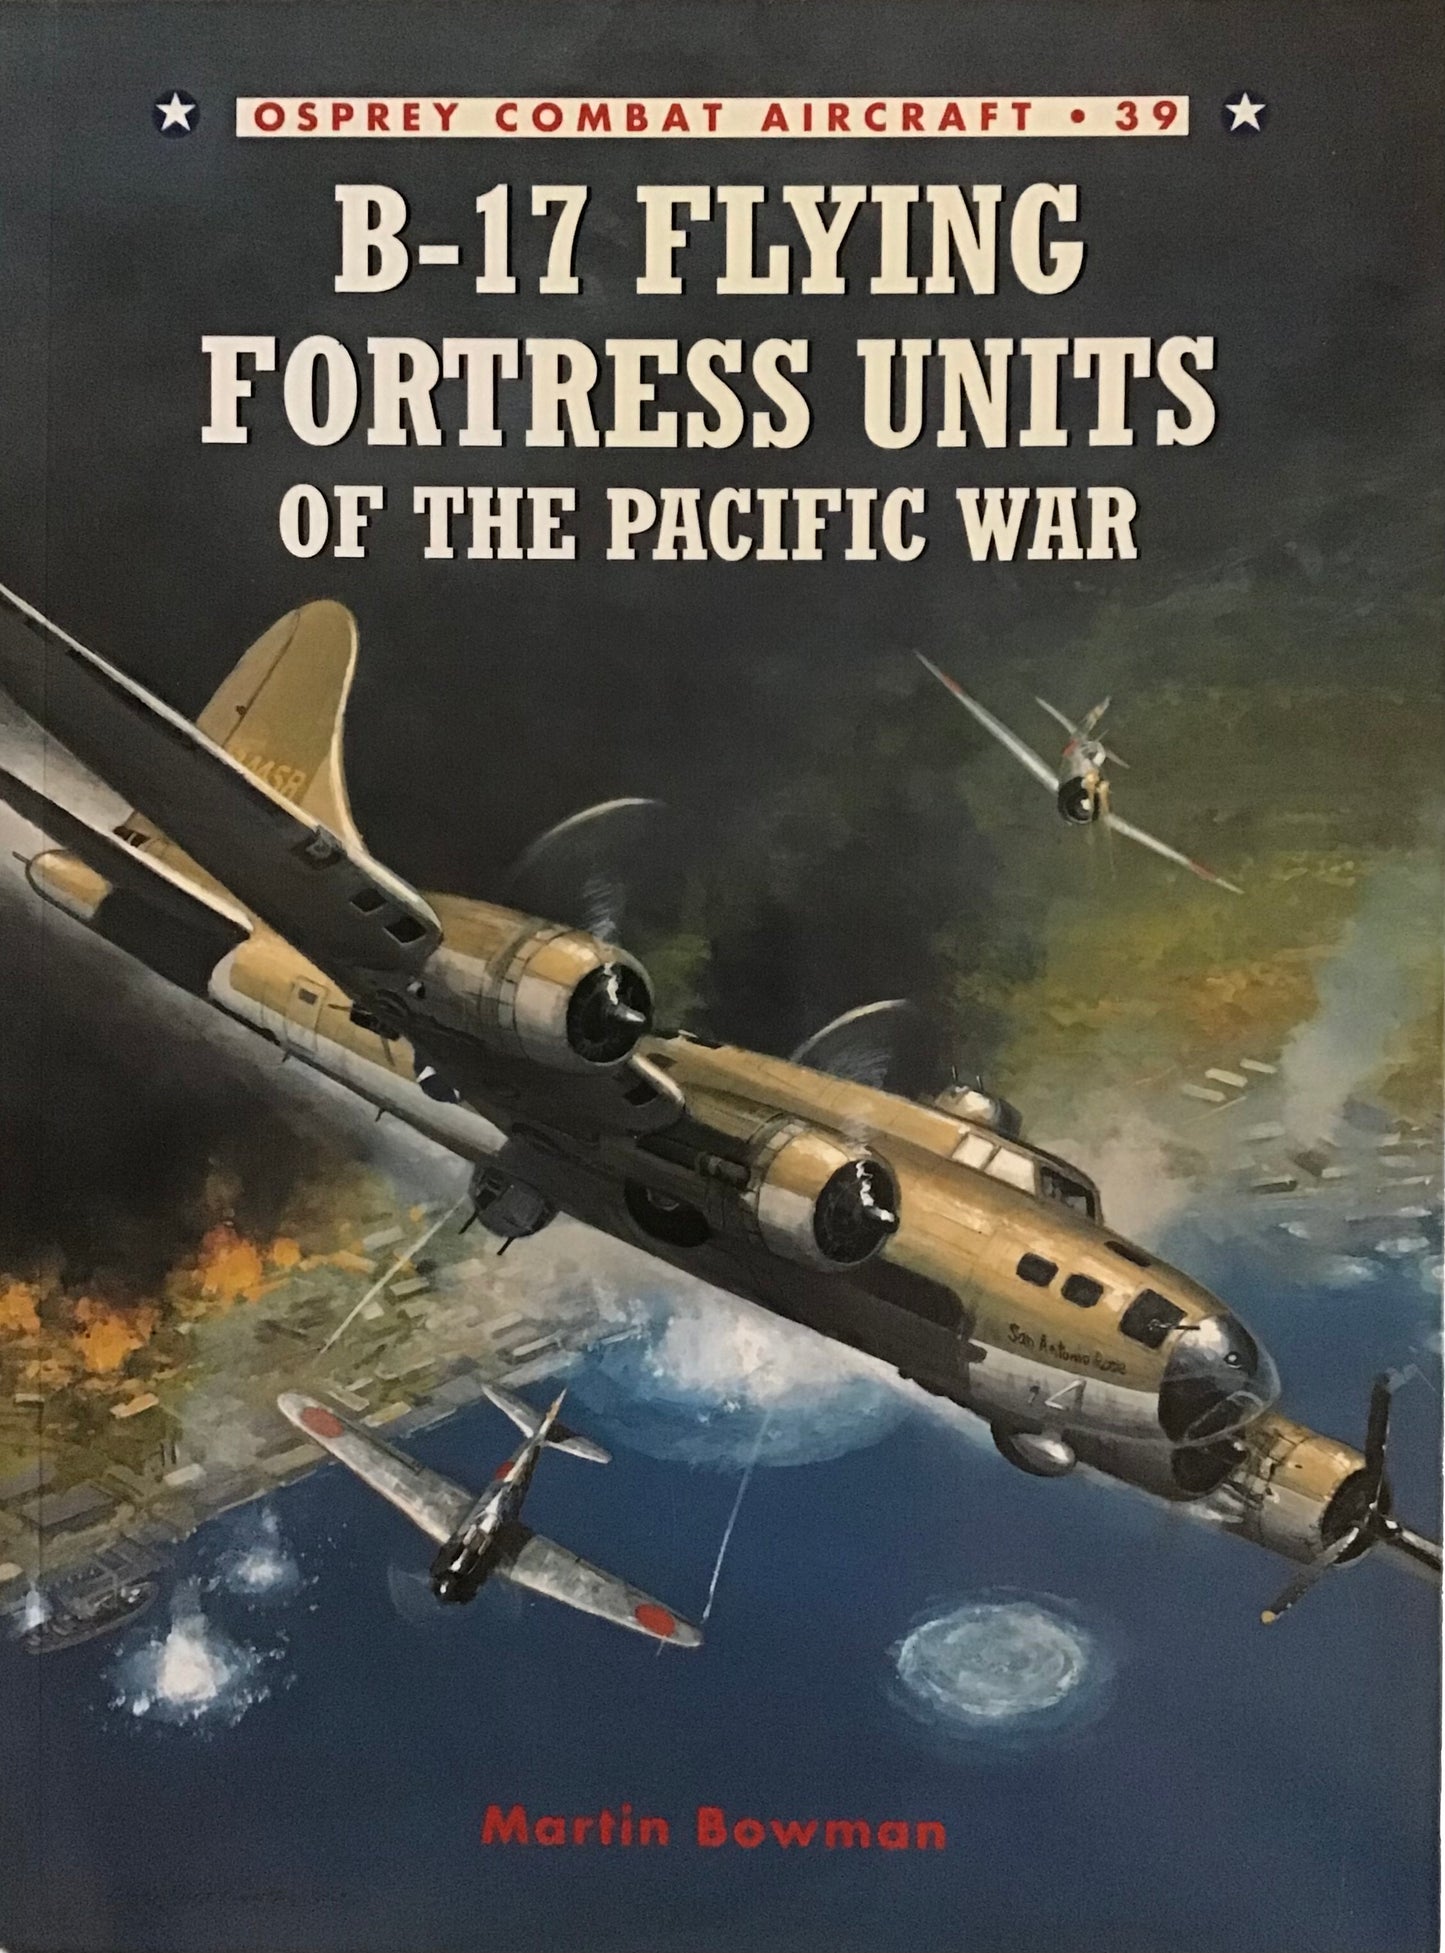 B-17 Flying Fortress Units of the Pacific War by Martin Bowman - Chester Model Centre